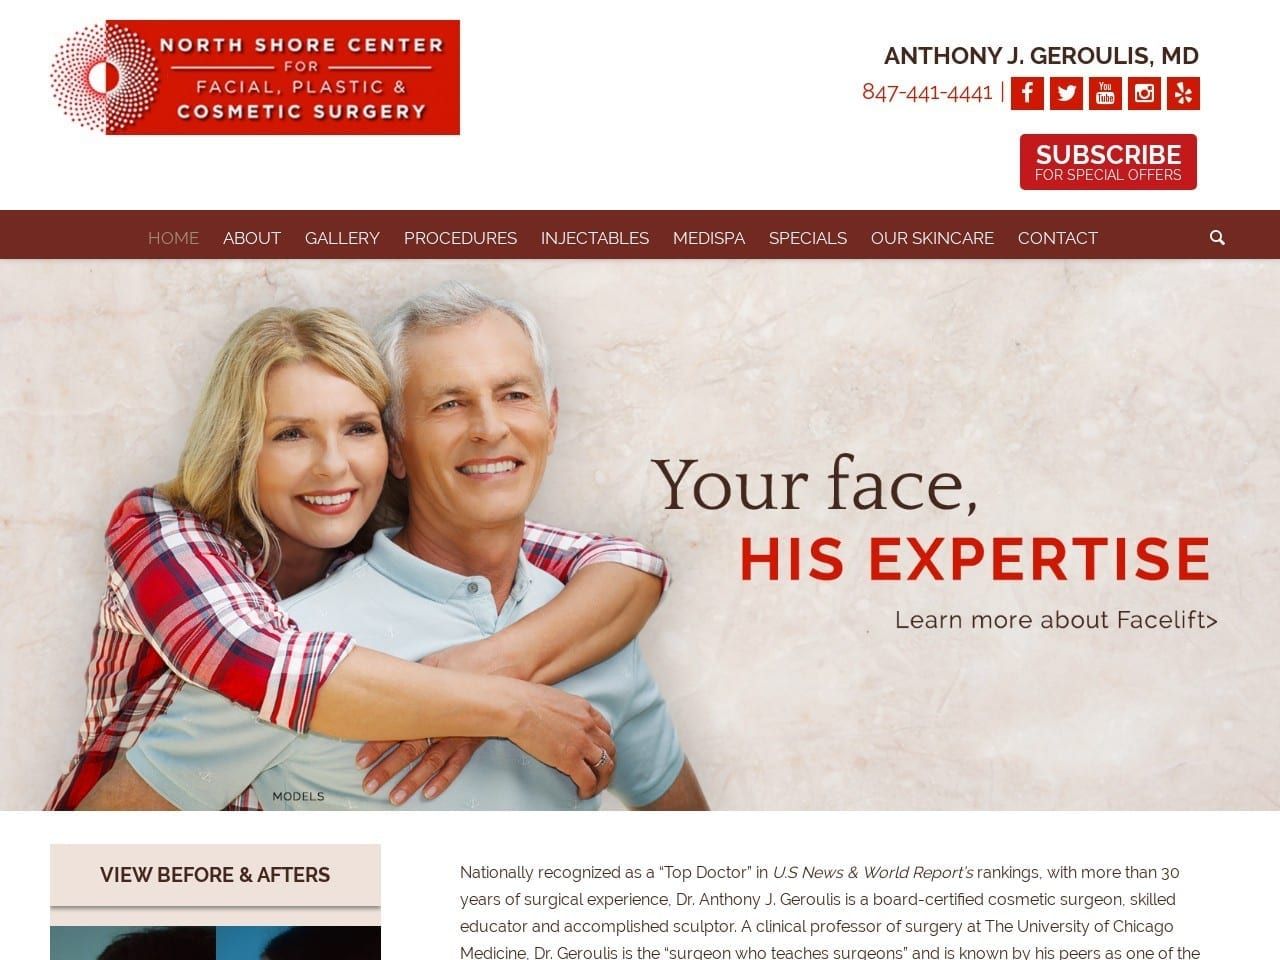 North Shore Center For Facial Plastic And Cosmetic Website Screenshot from geroulis.com